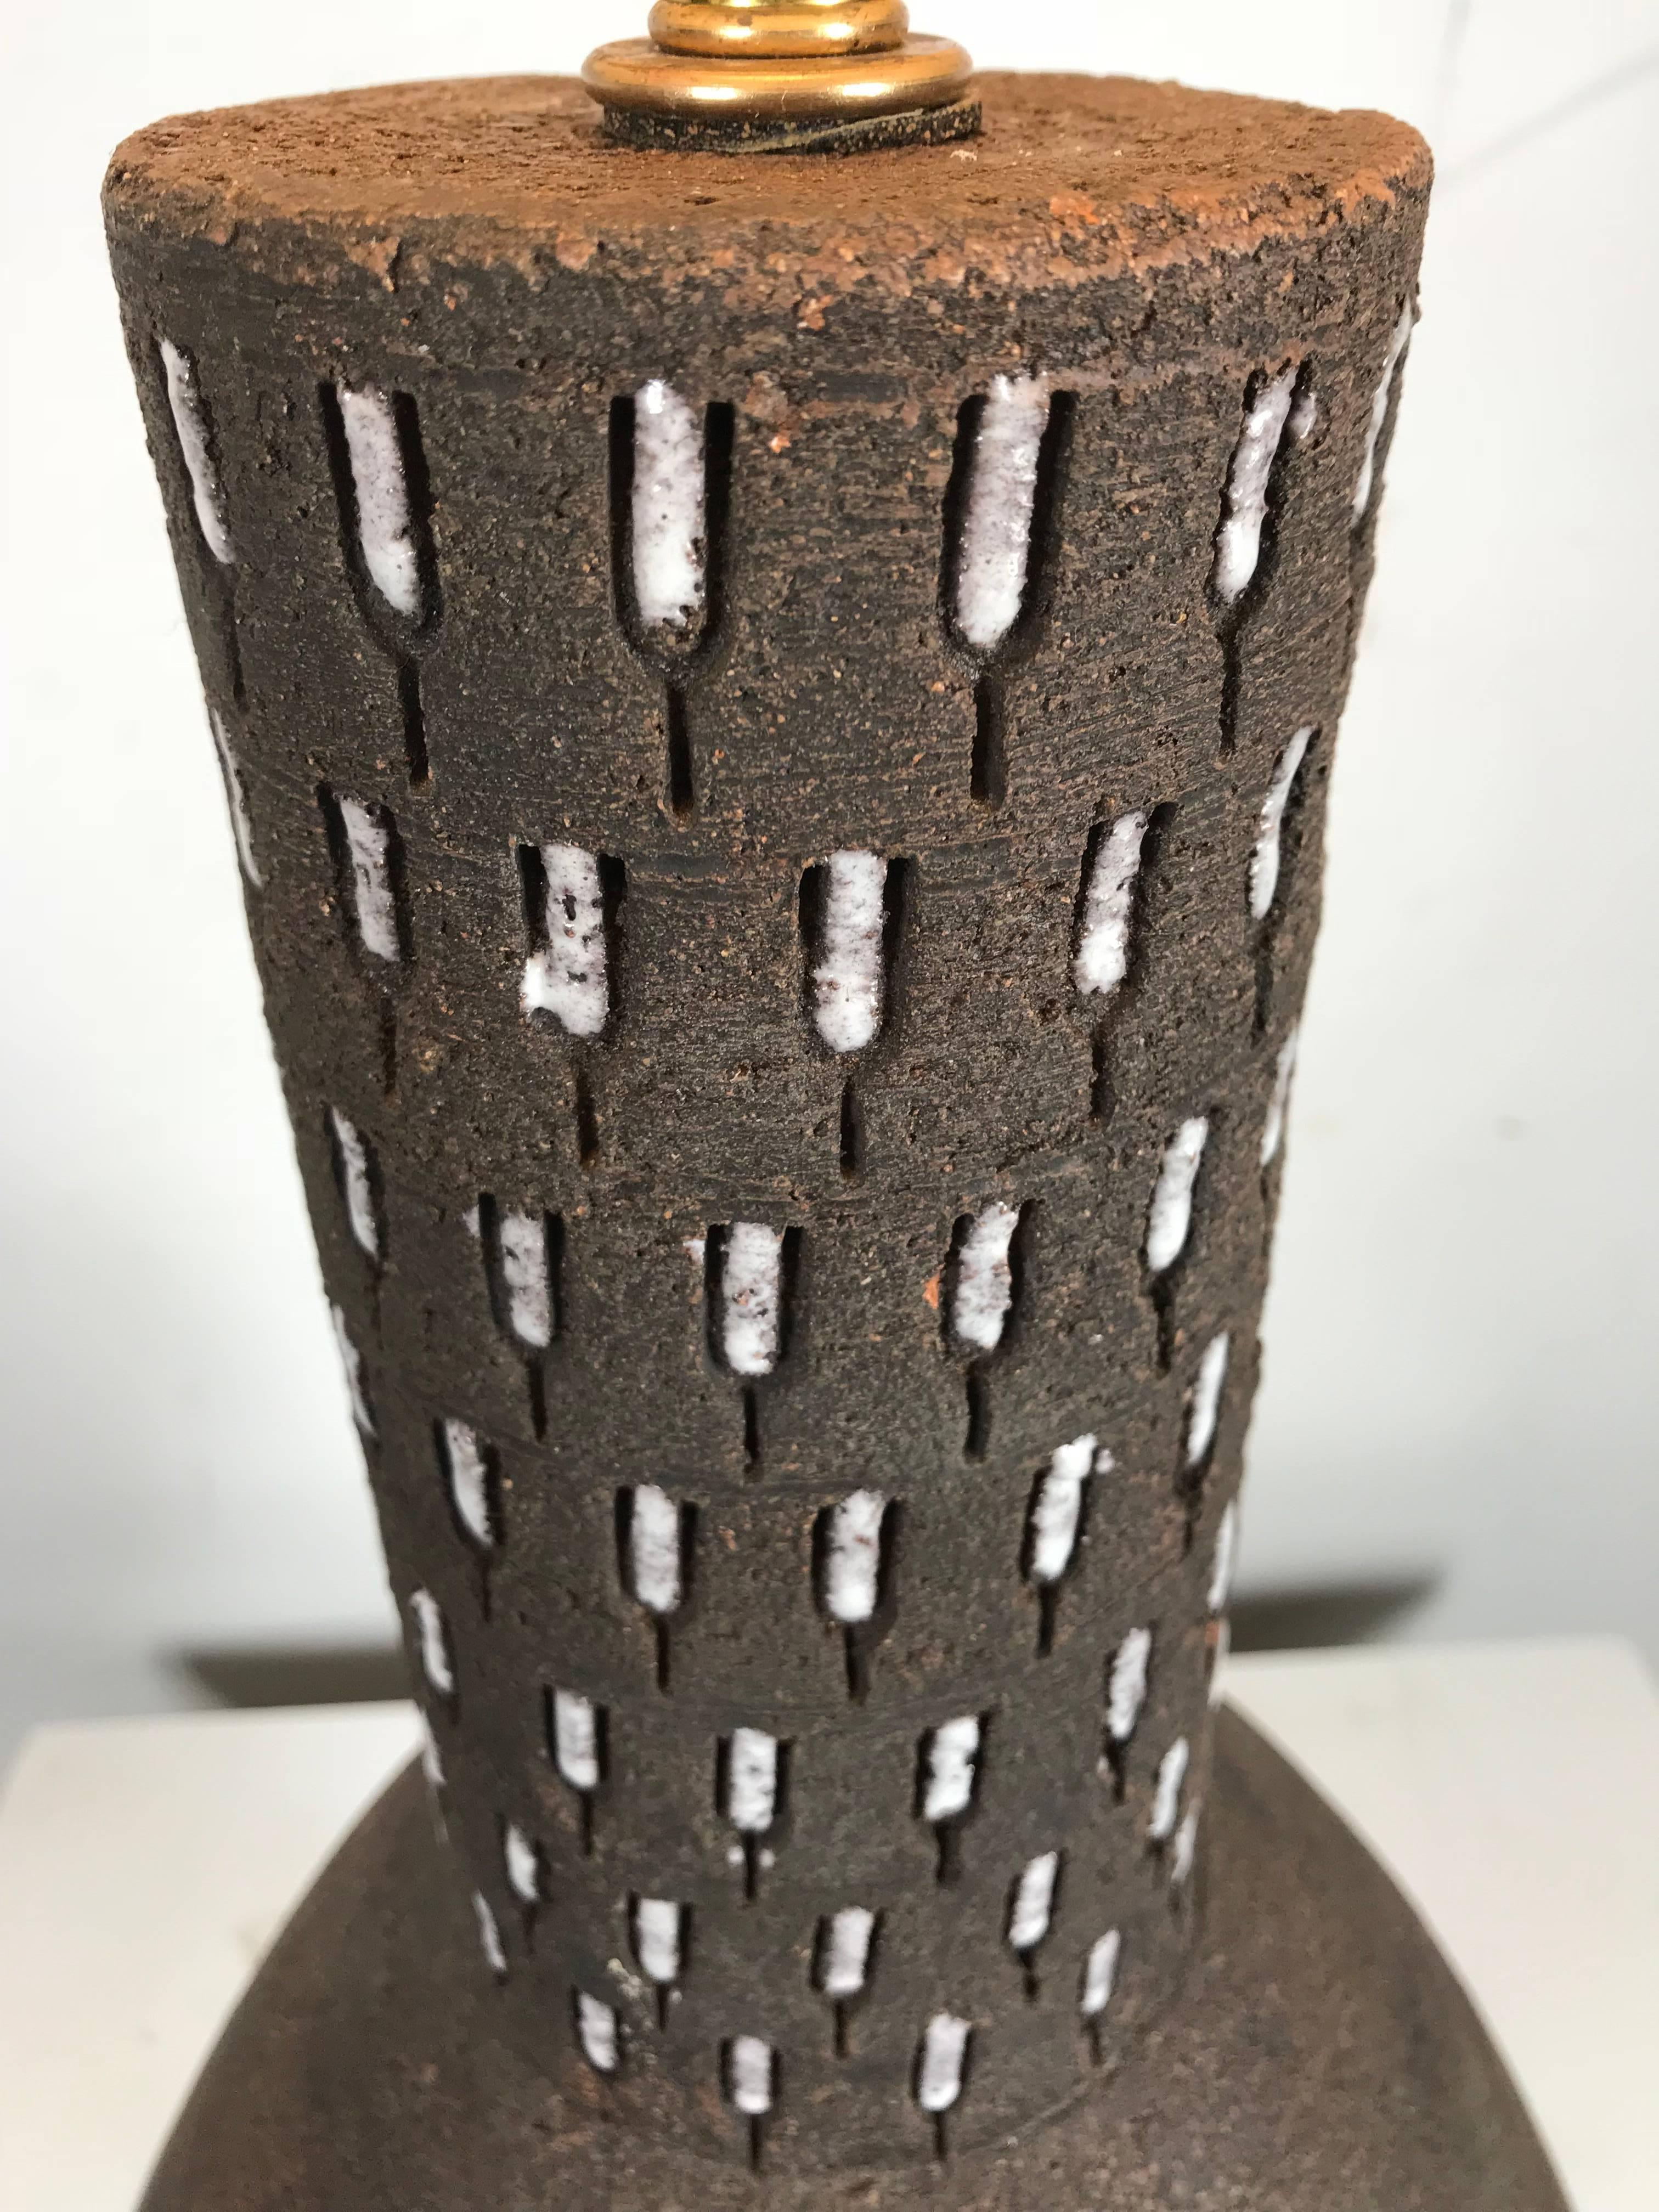 Elusive Lightolier ceramic and brass table lamp, Italian pottery attributed to Gerald Thurston, stunning modernist decorative Italian pottery vessel atop atomic formed brass base.